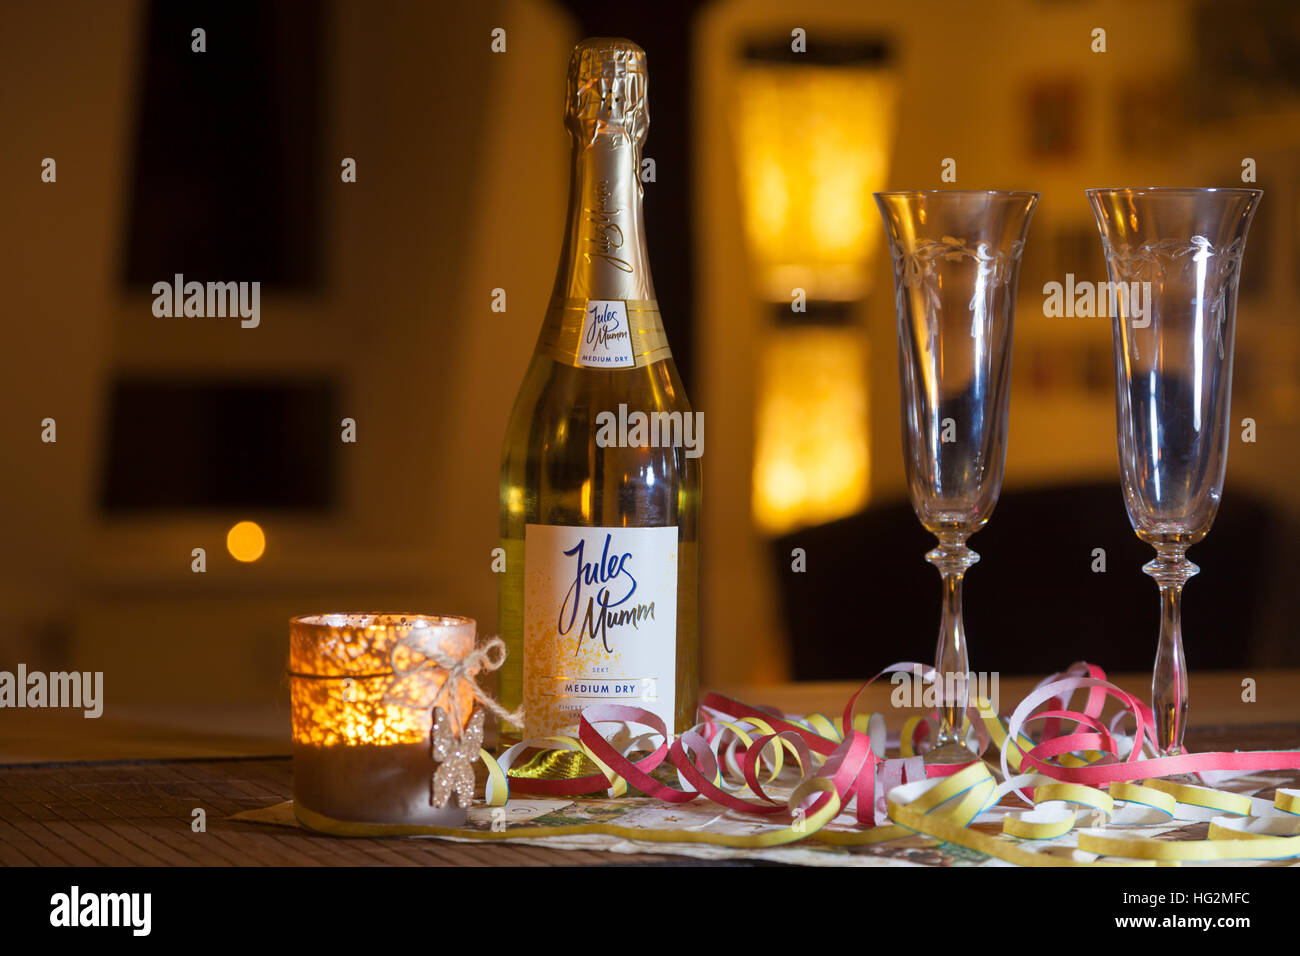 Mumm Bottle High Resolution Stock Photography and Images - Alamy